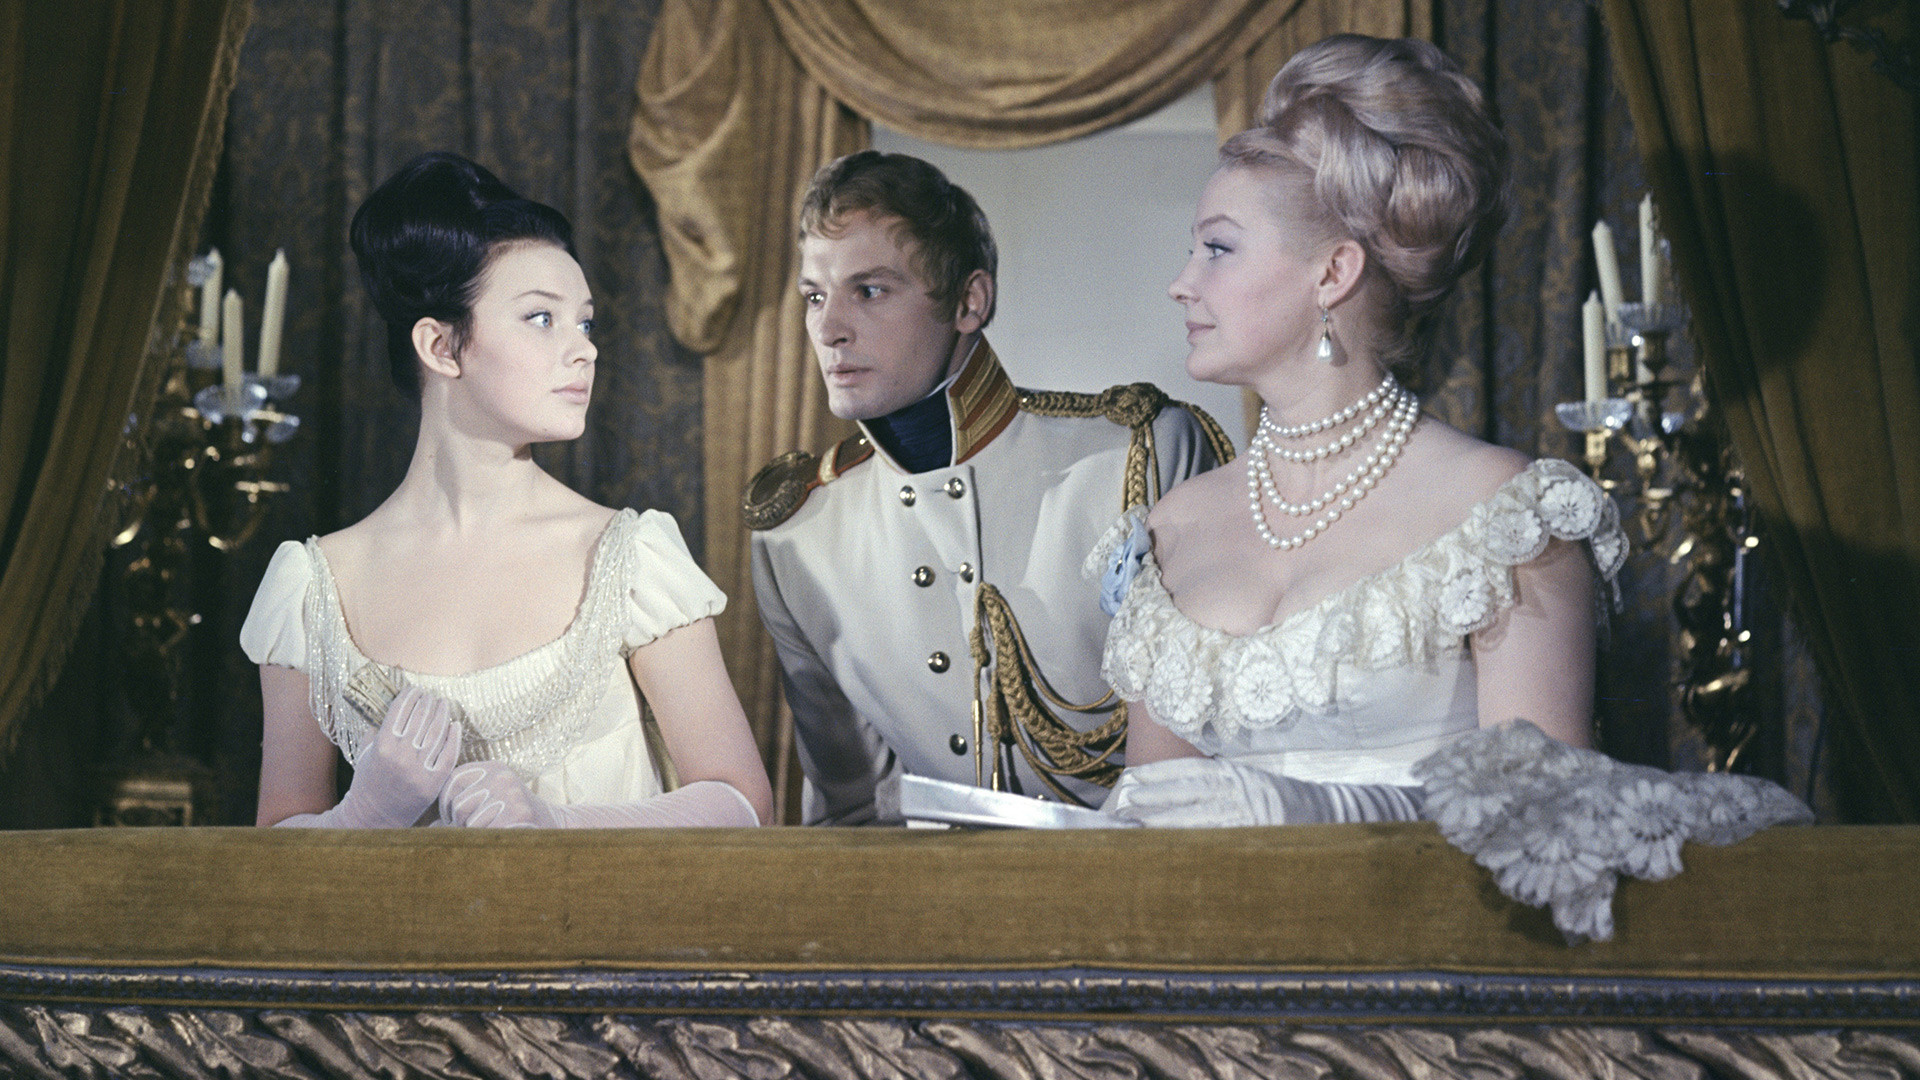 Still from "War and Peace" movie directed by Sergei Bondarchuk. Mosfilm. 1968